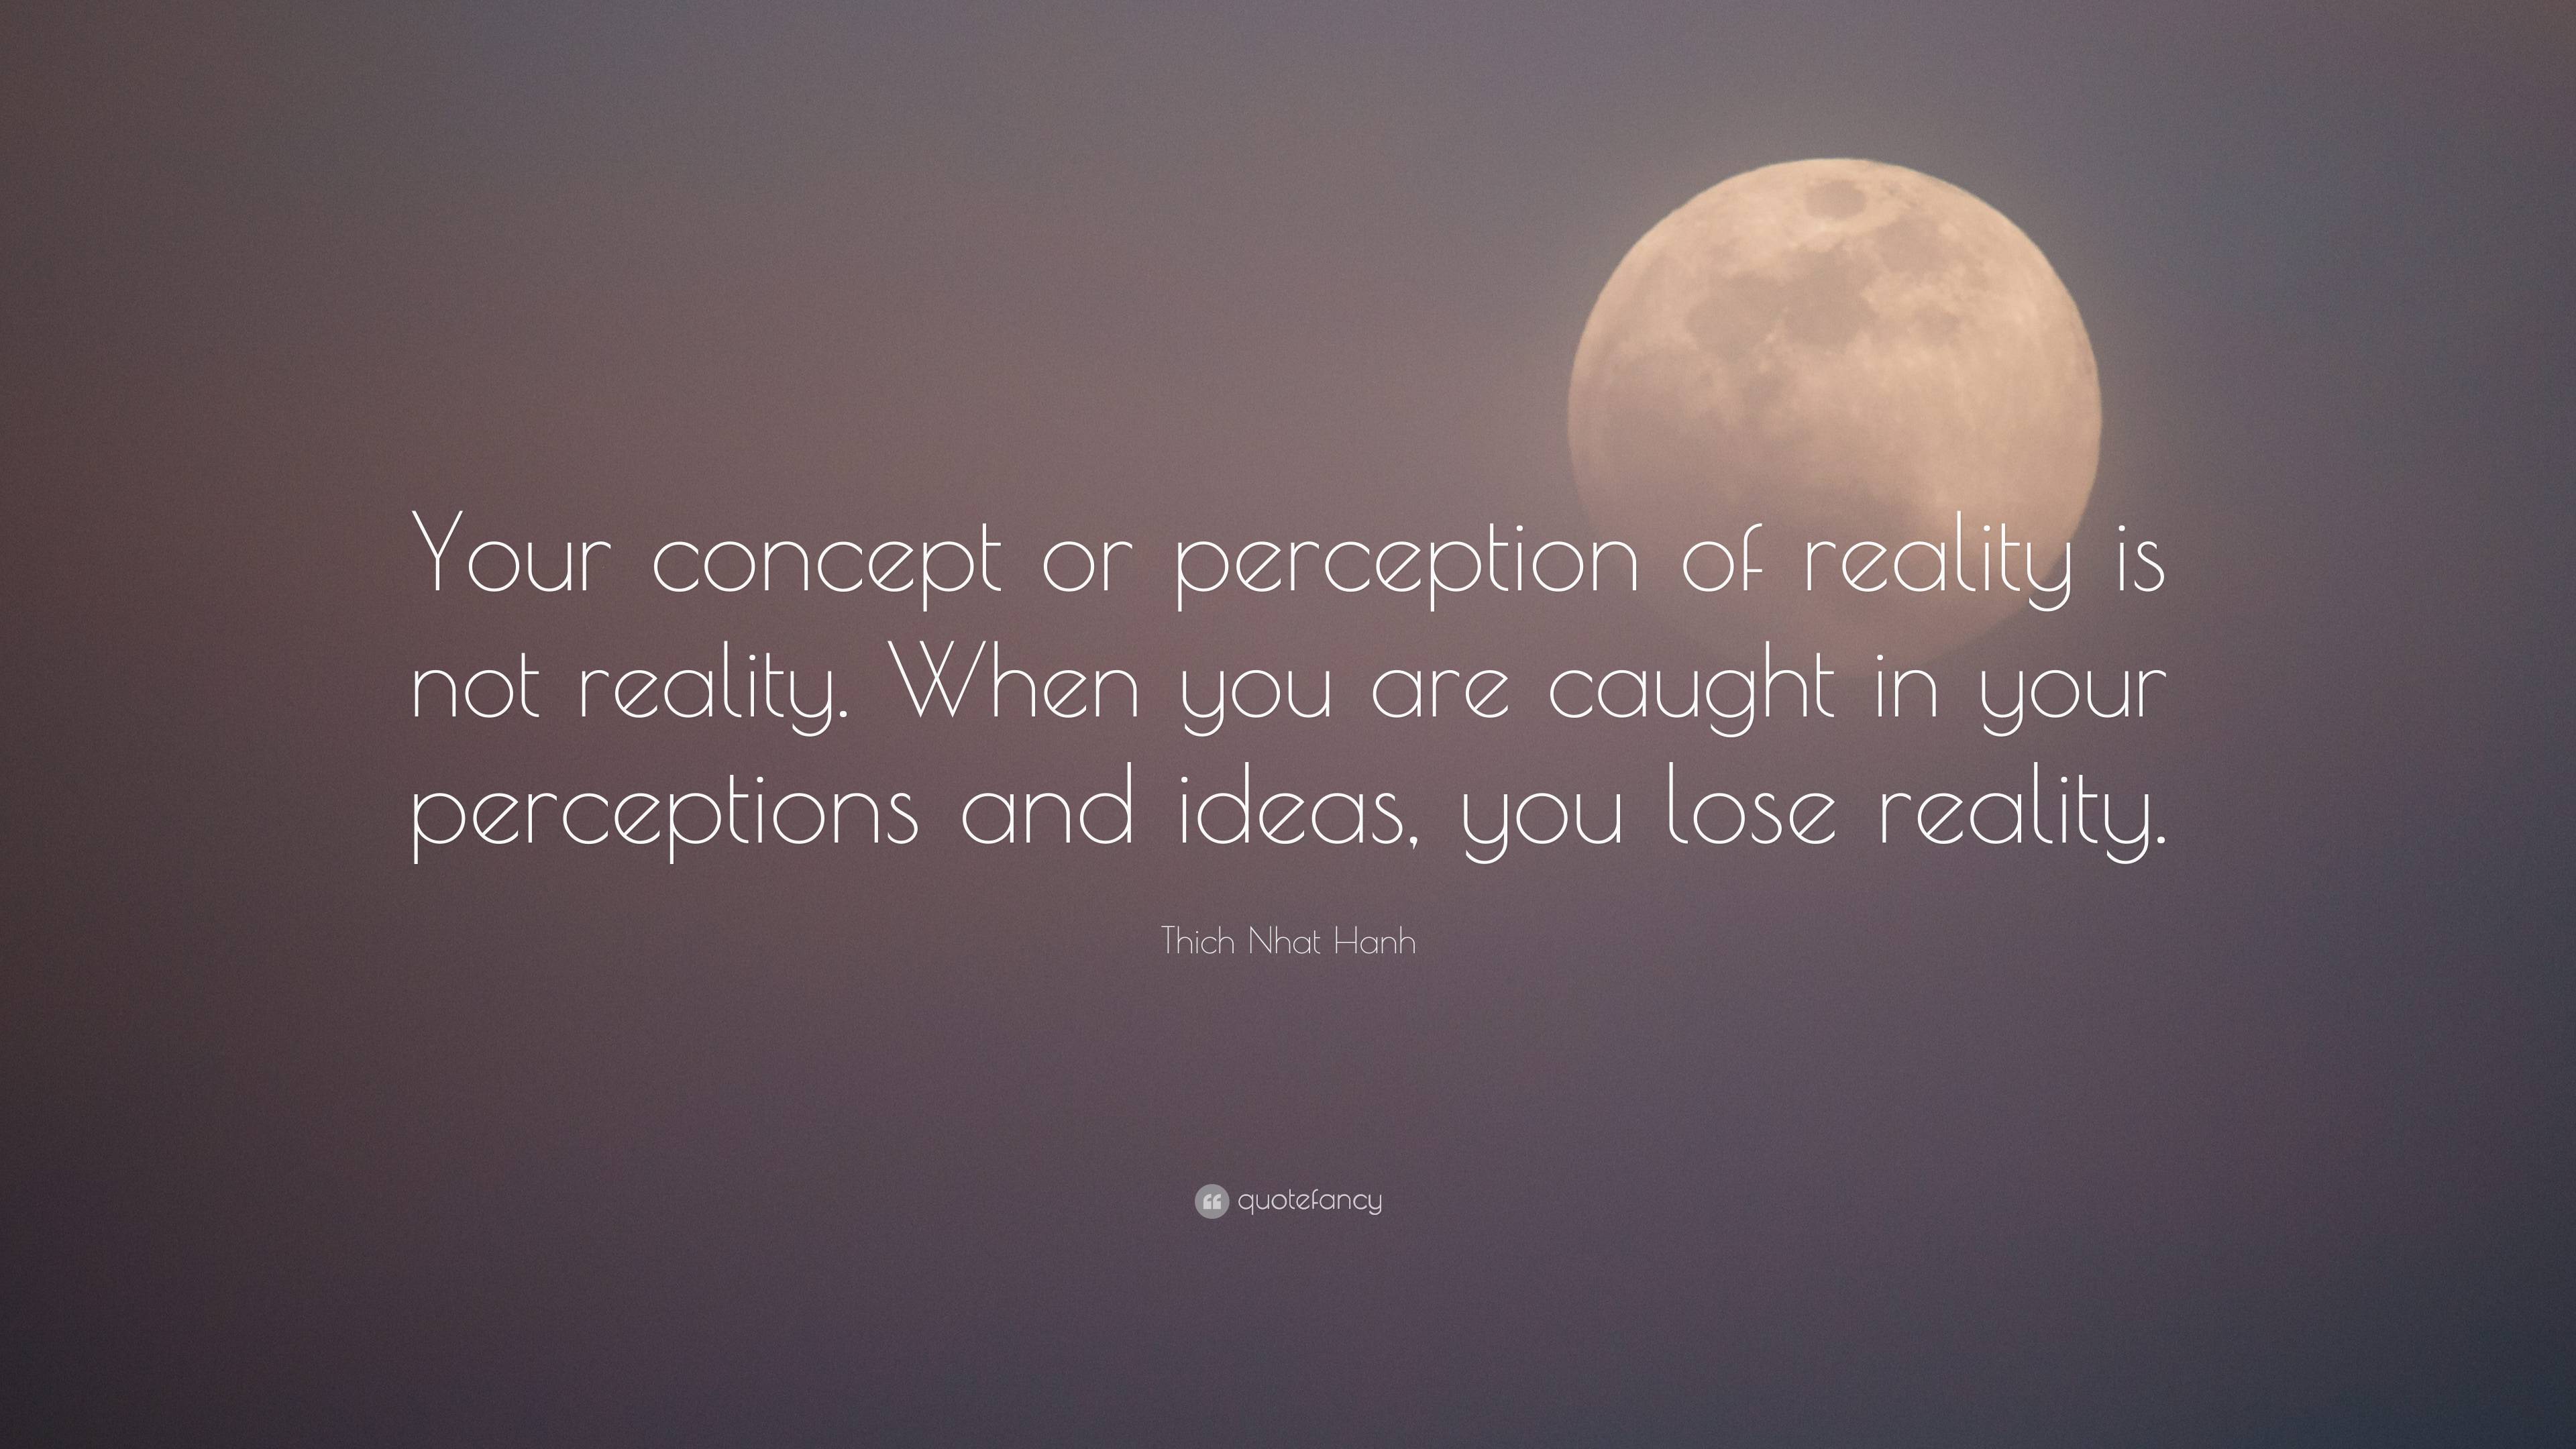 Thich Nhat Hanh Quote: “Your concept or perception of reality is not ...